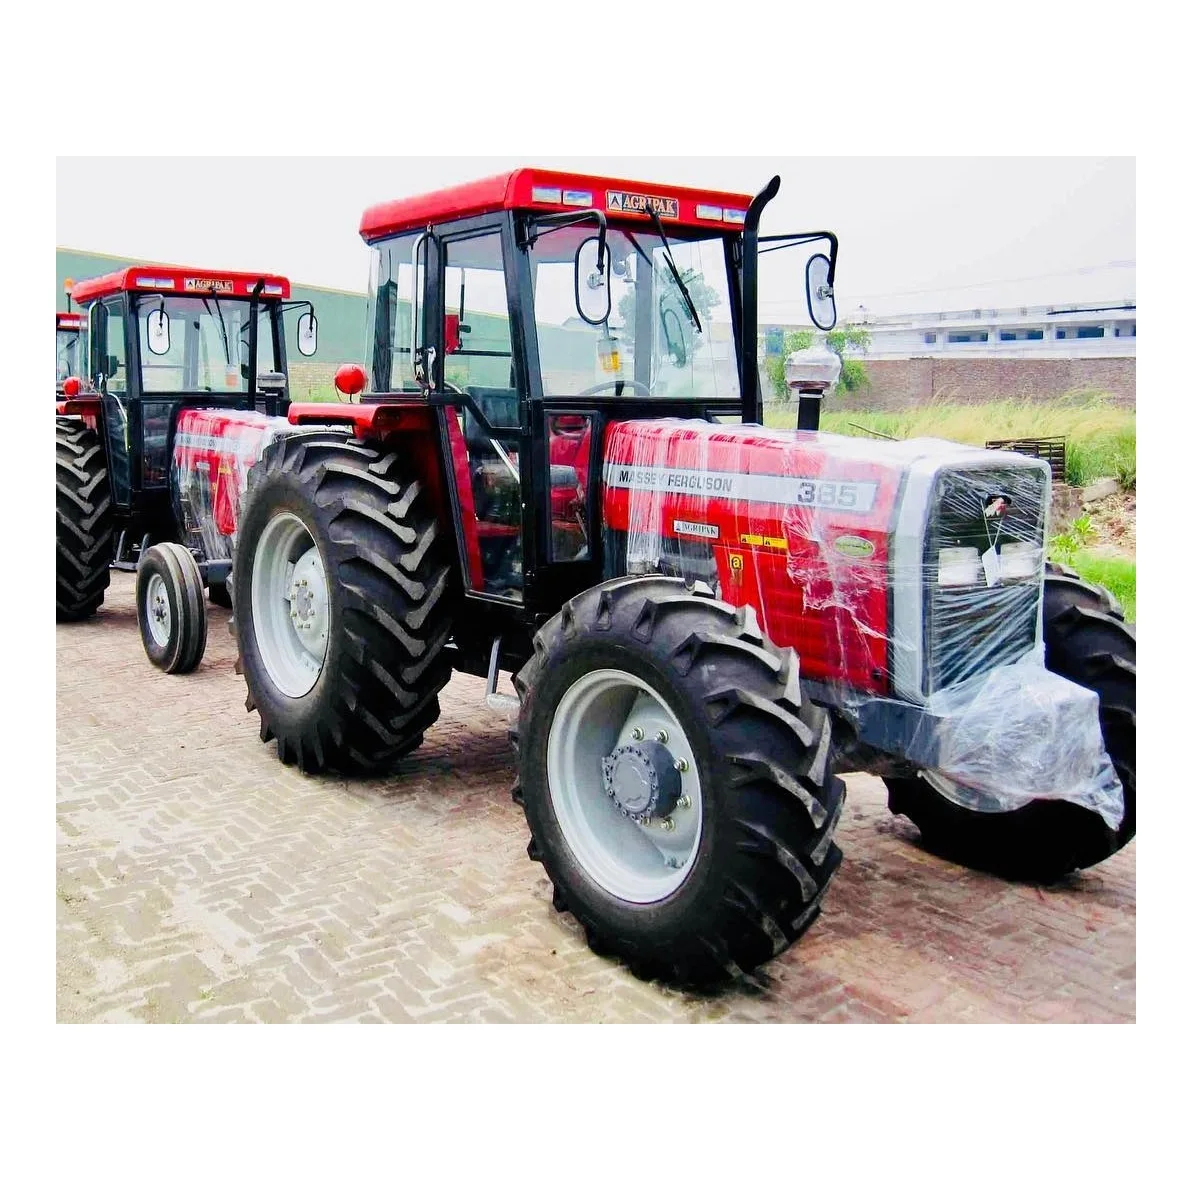 Bulk Quantity Of Used Massey Ferguson 290 Tractors For Agriculture Available Here At Best Prices